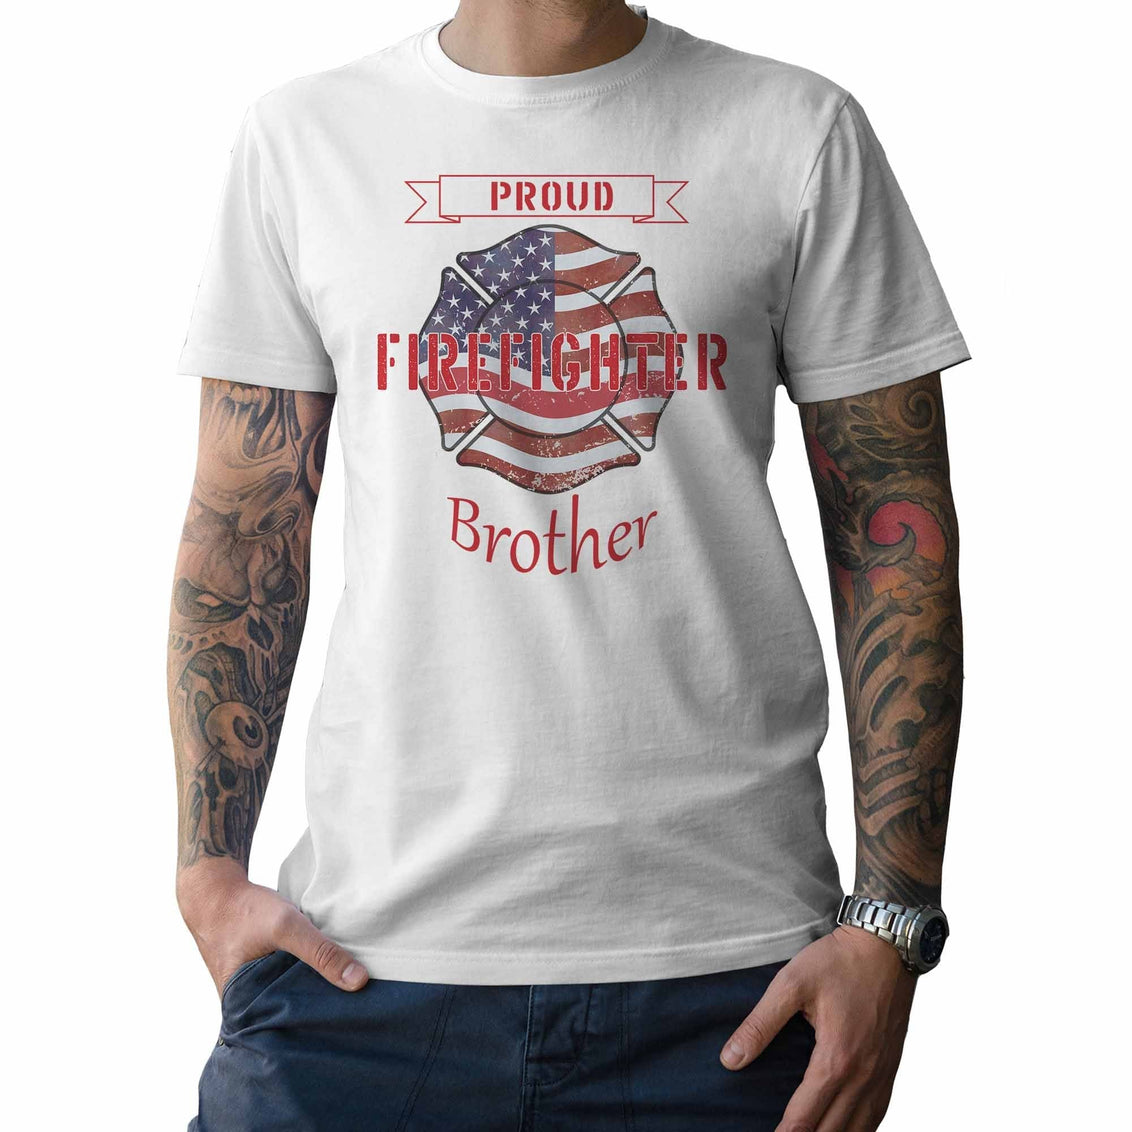 Proud Firefighter Brother - My Custom Tee Party